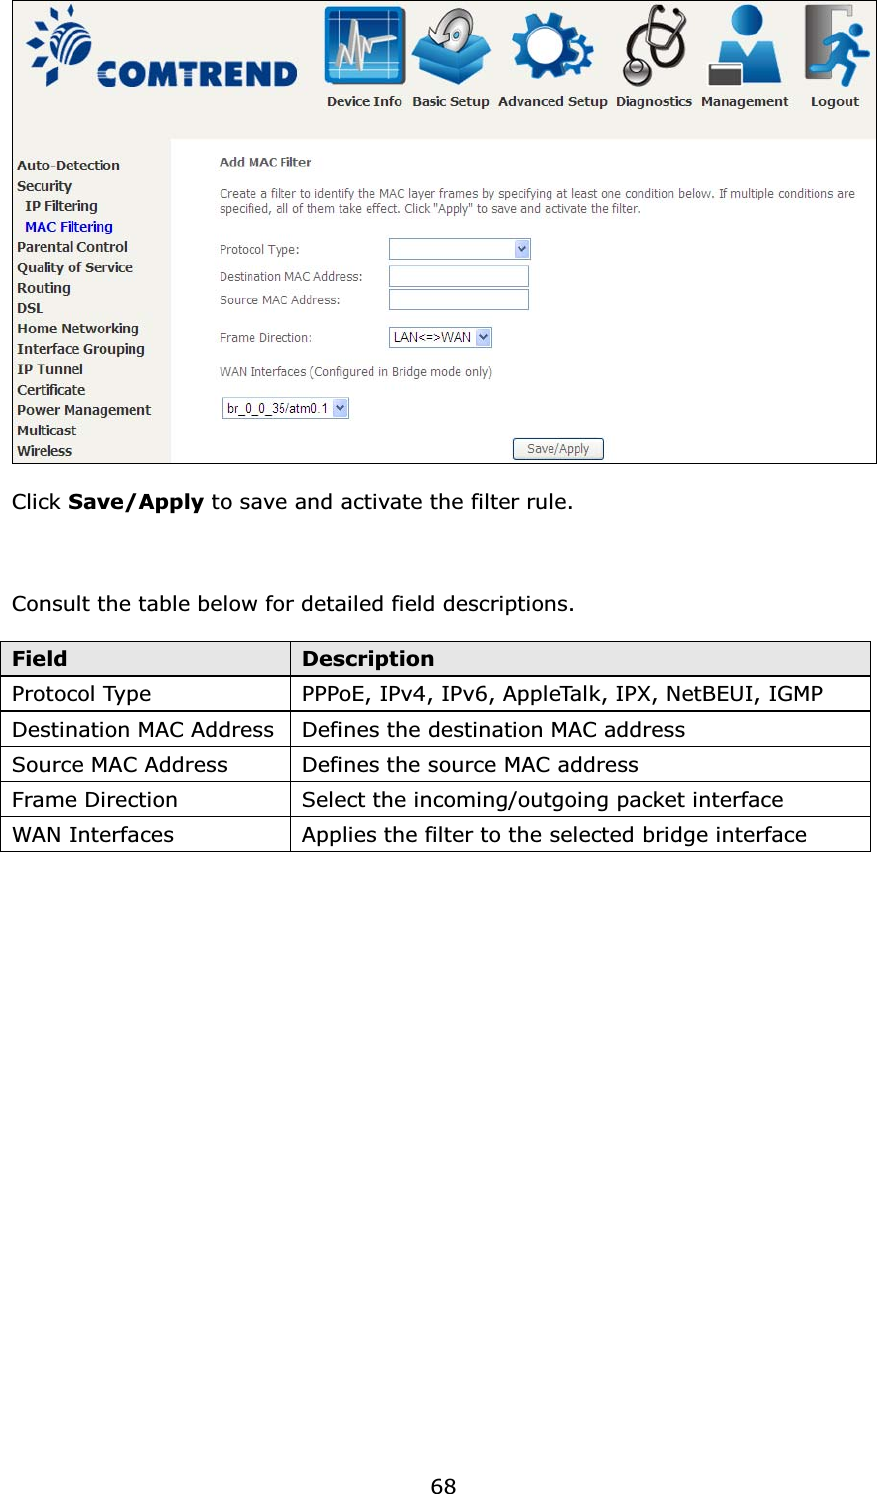 68Click Save/Apply to save and activate the filter rule.Consult the table below for detailed field descriptions.Field DescriptionProtocol Type PPPoE, IPv4, IPv6, AppleTalk, IPX, NetBEUI, IGMPDestination MAC Address Defines the destination MAC addressSource MAC Address Defines the source MAC addressFrame Direction Select the incoming/outgoing packet interfaceWAN Interfaces Applies the filter to the selected bridge interface